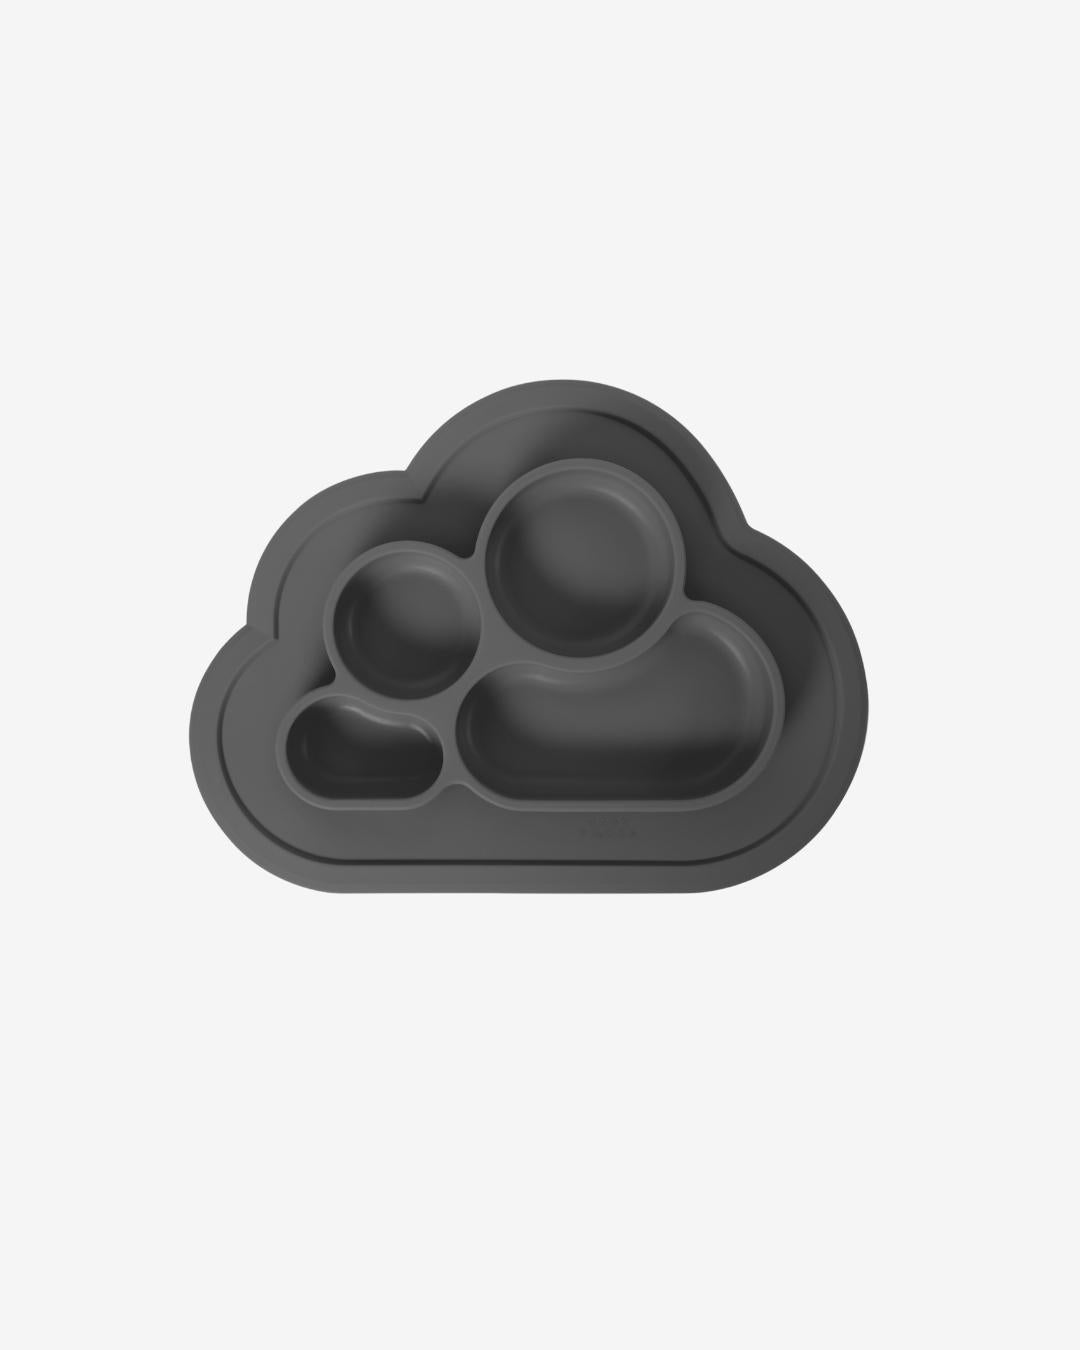 Weaning Cloud Plate Mat | Grippy Suction | Non-slip | Catch-food | Side scoops | Easy clean (Charcoal Grey)